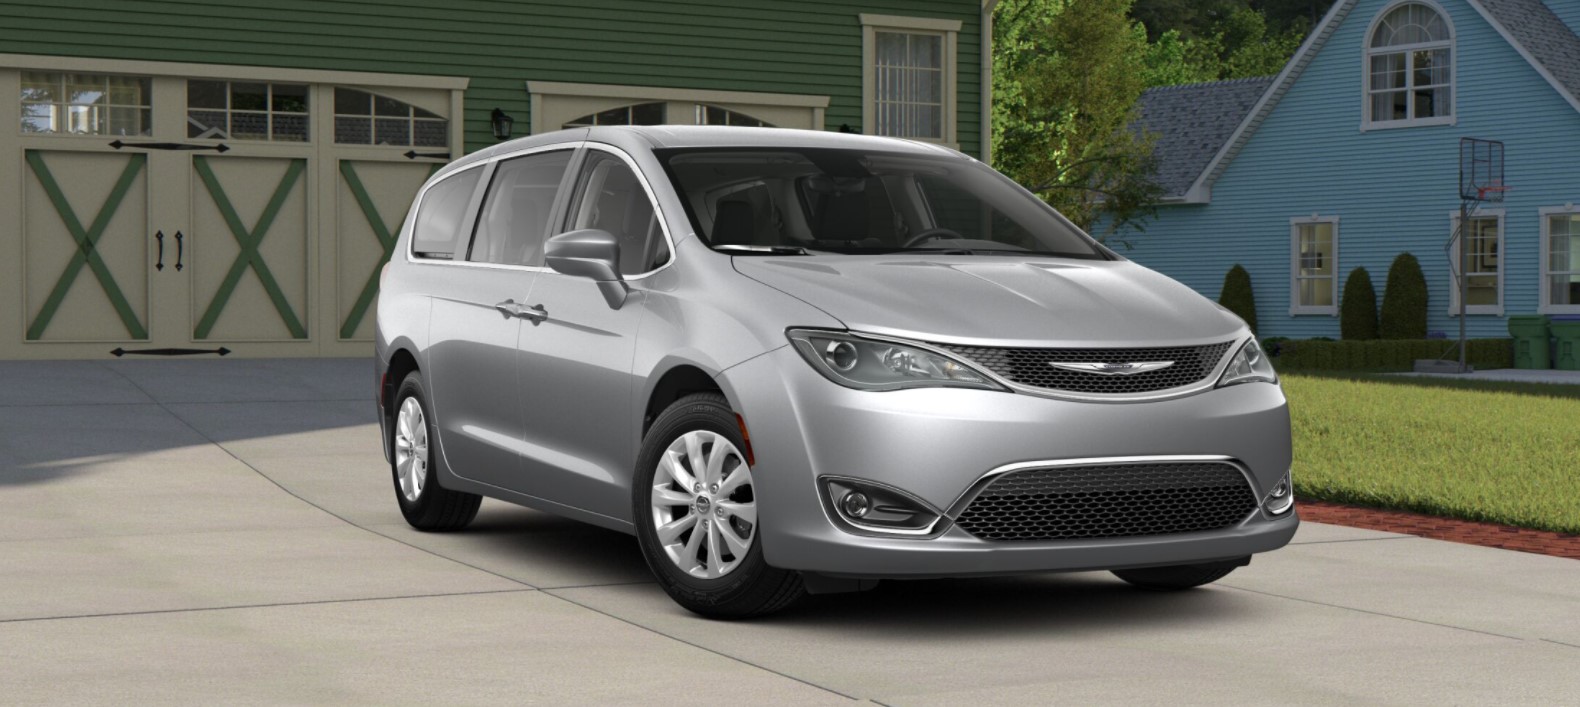 2018 Chrysler Pacifica Touring Plus Front Silver Exterior